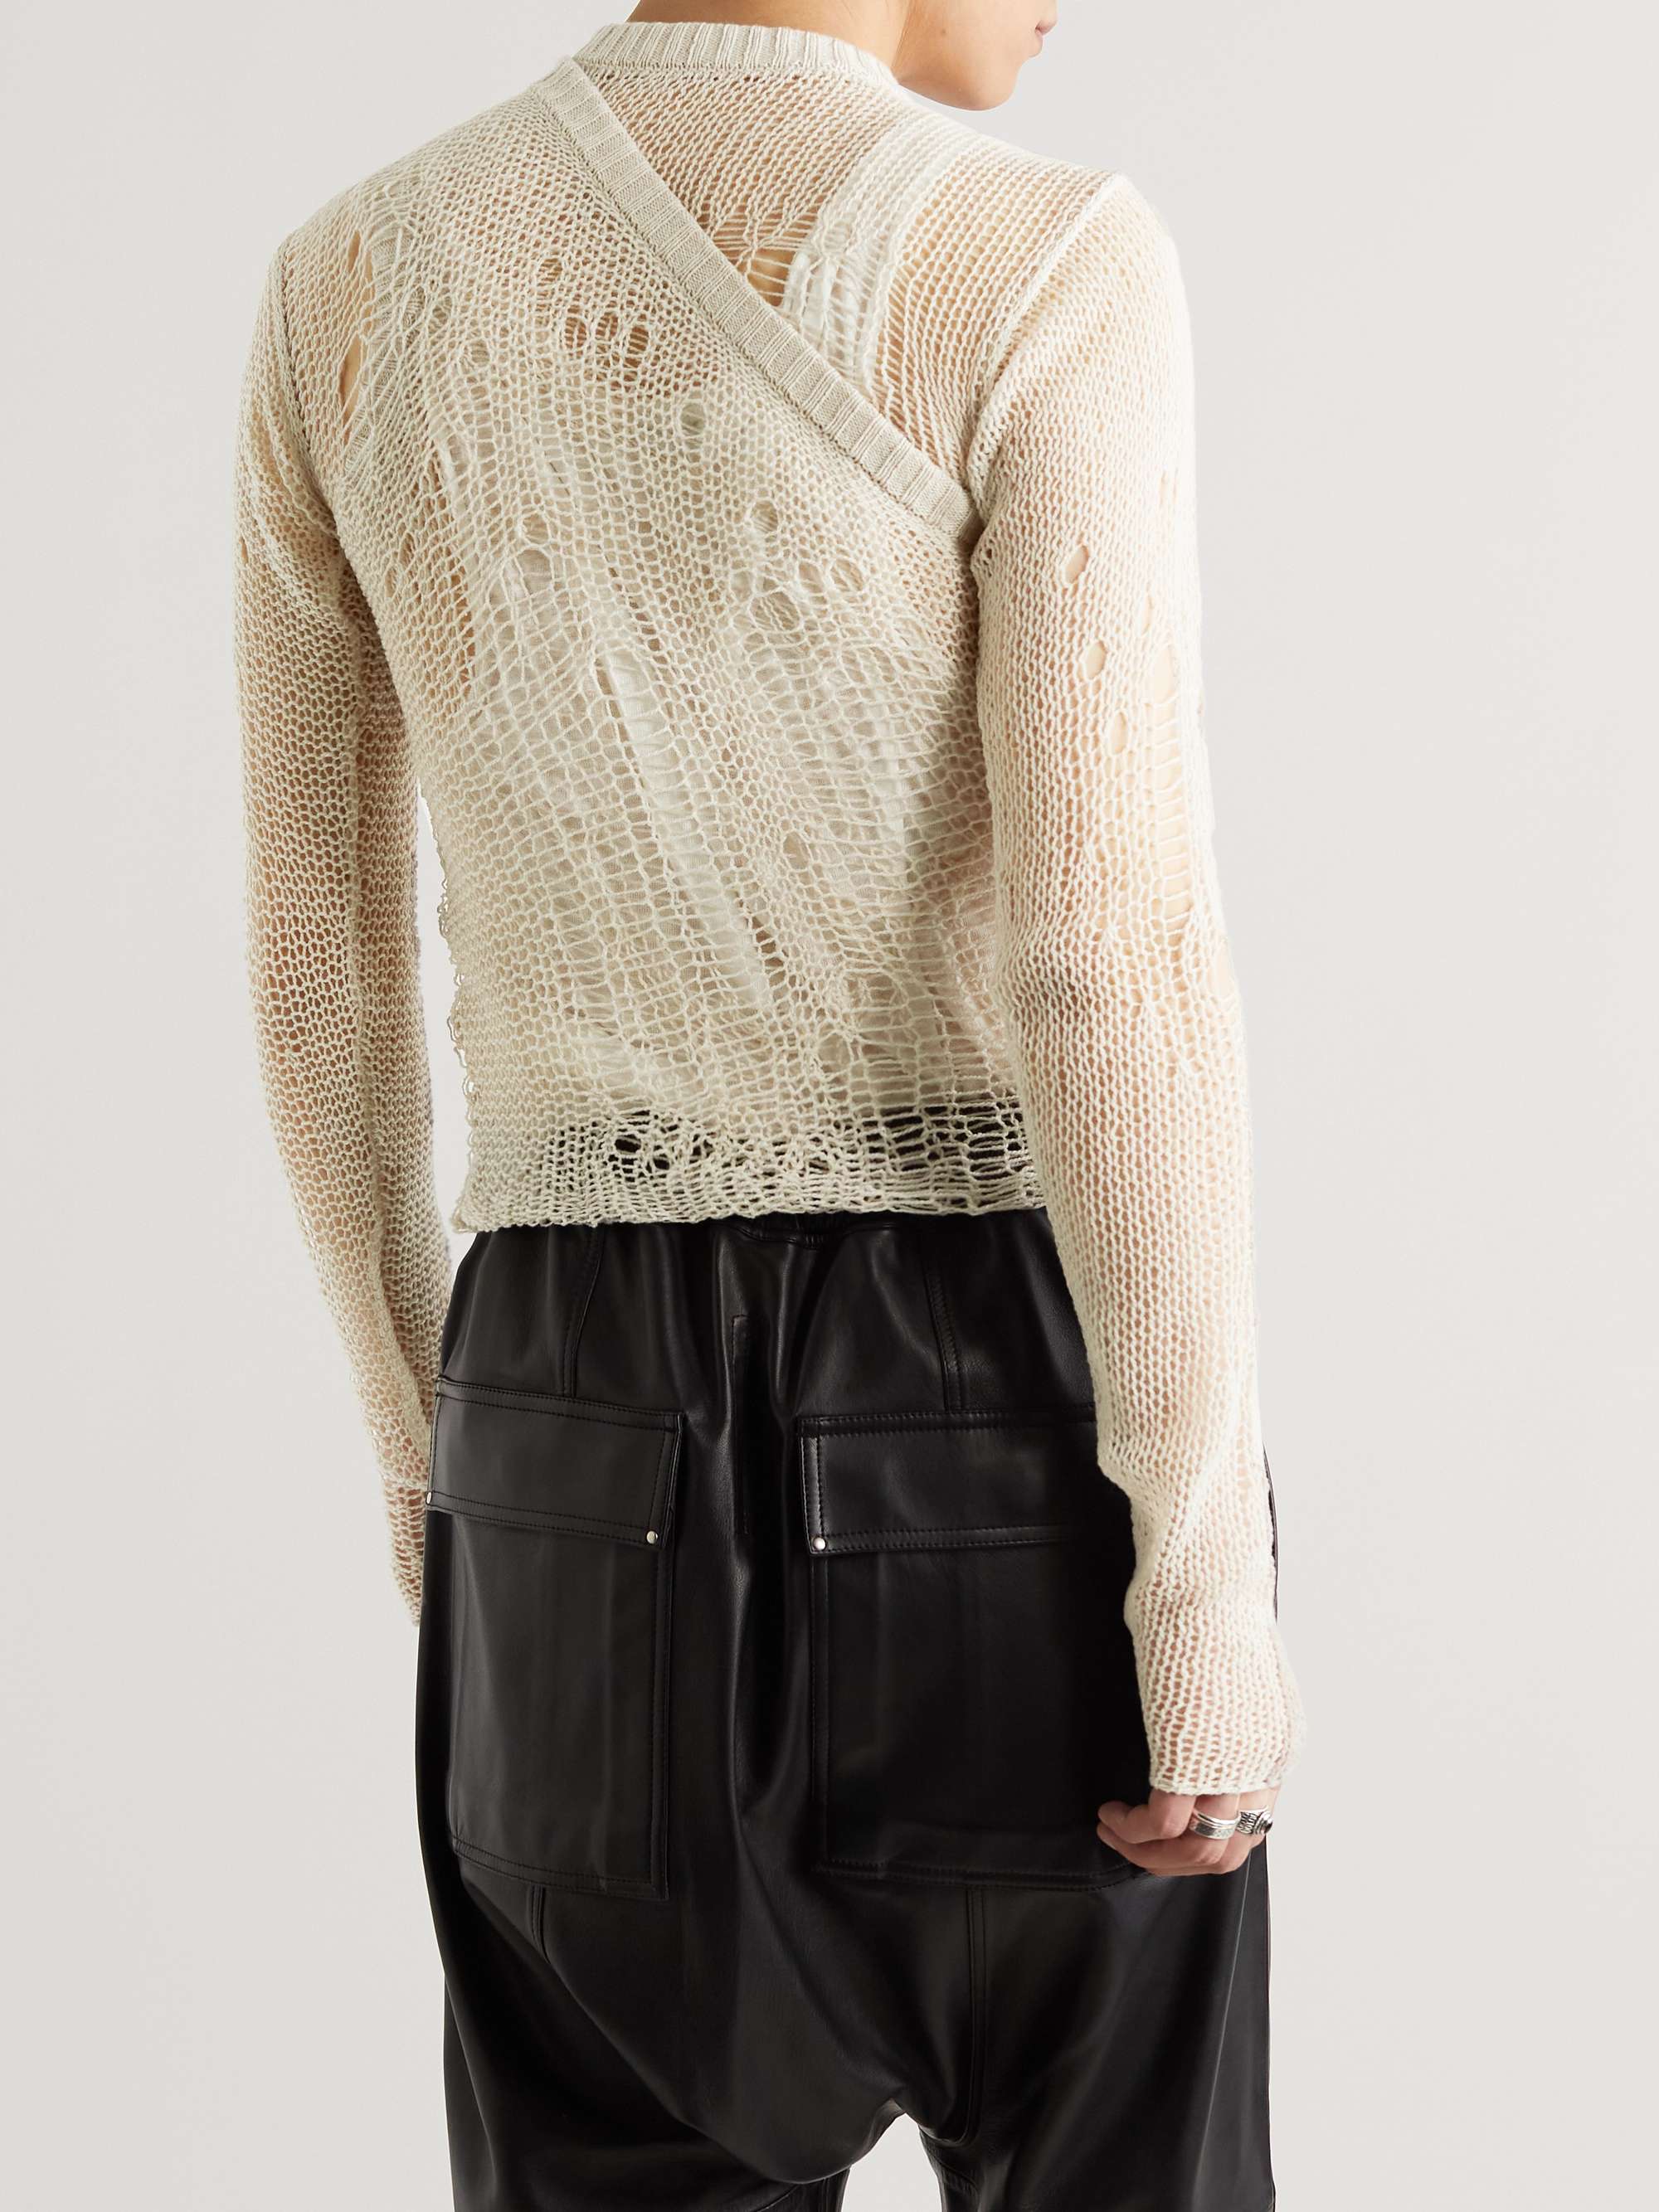 RICK OWENS Distressed Open-Knit Cashmere and Wool-Blend Sweater